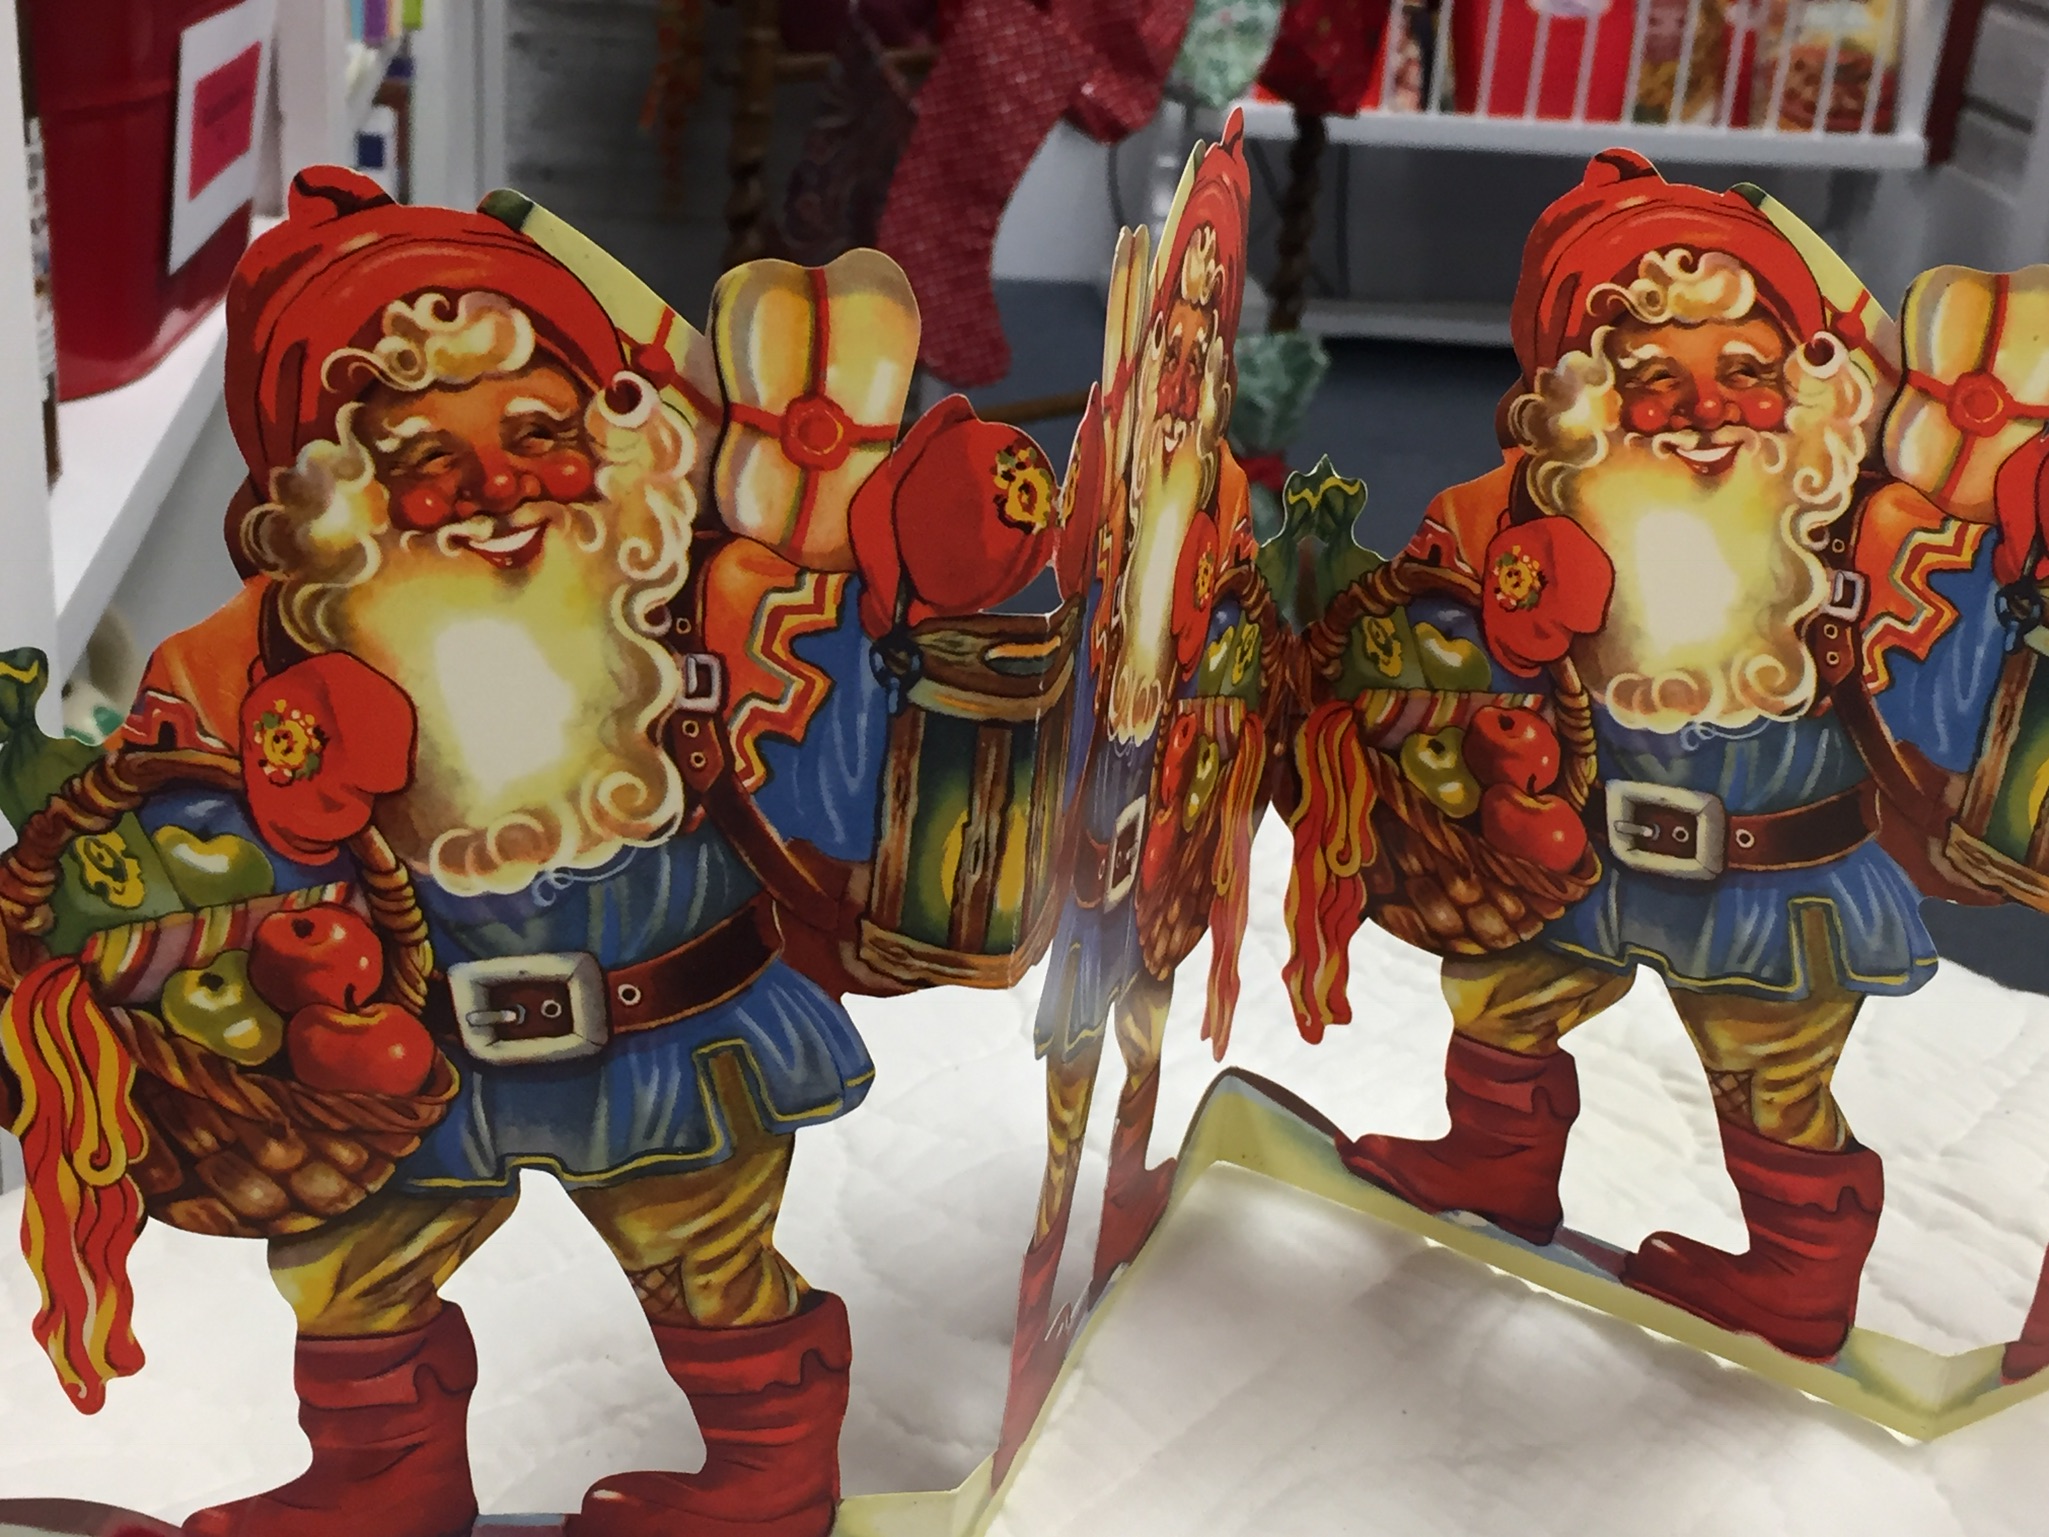 Traditional Swedish Christmas decorations on display at our Swedish Christmas book signing event. 